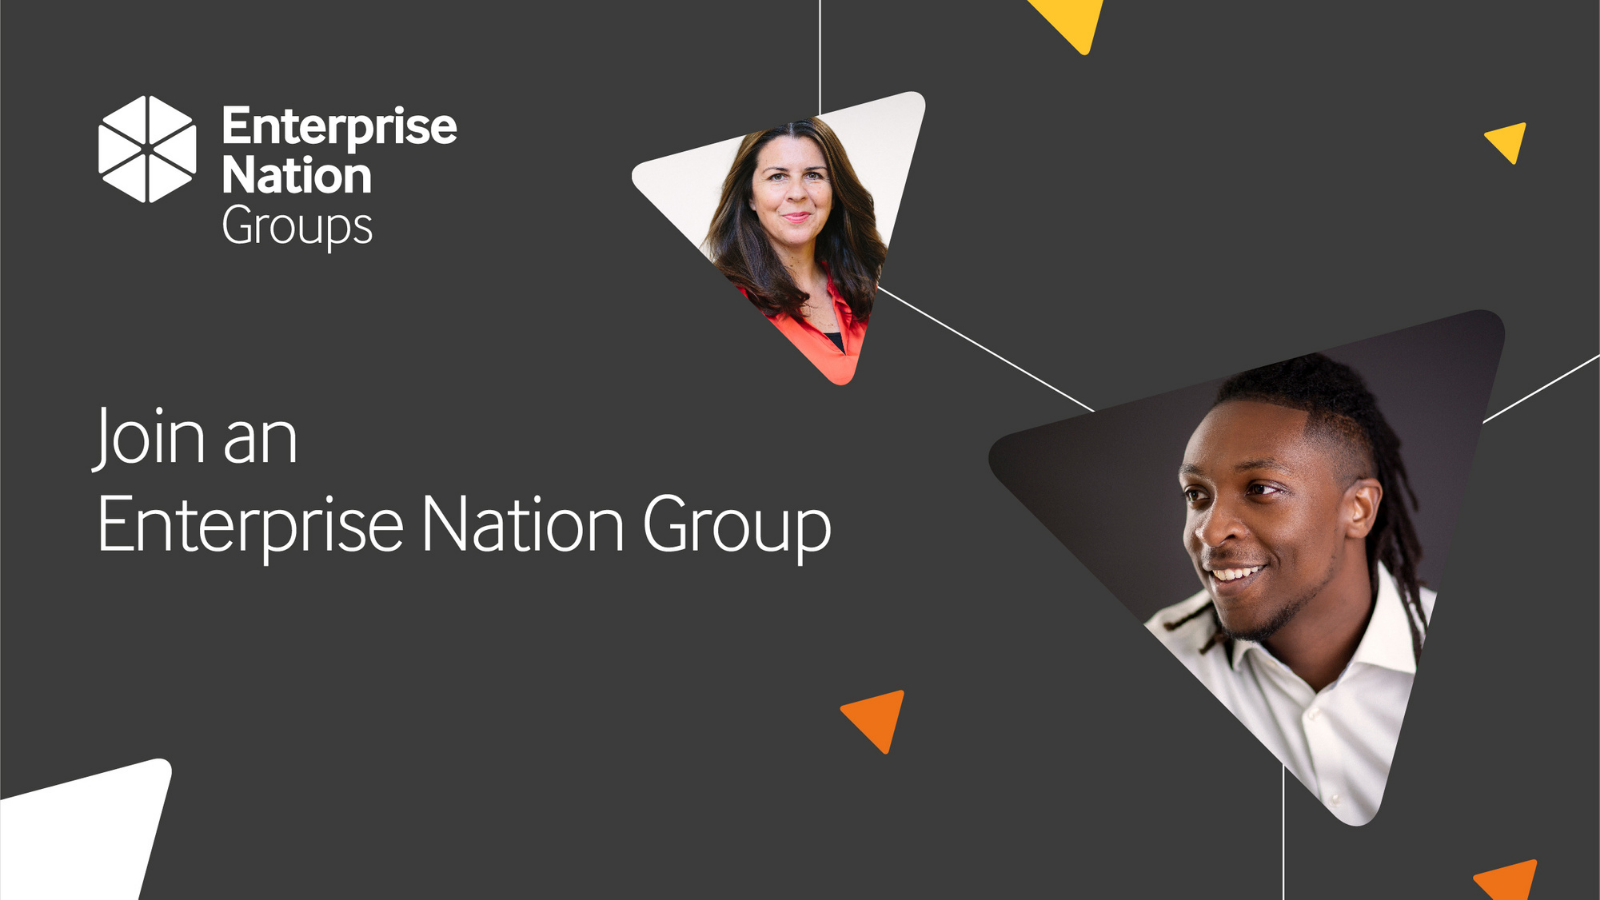 An introduction to Enterprise Nation's newest feature: Groups